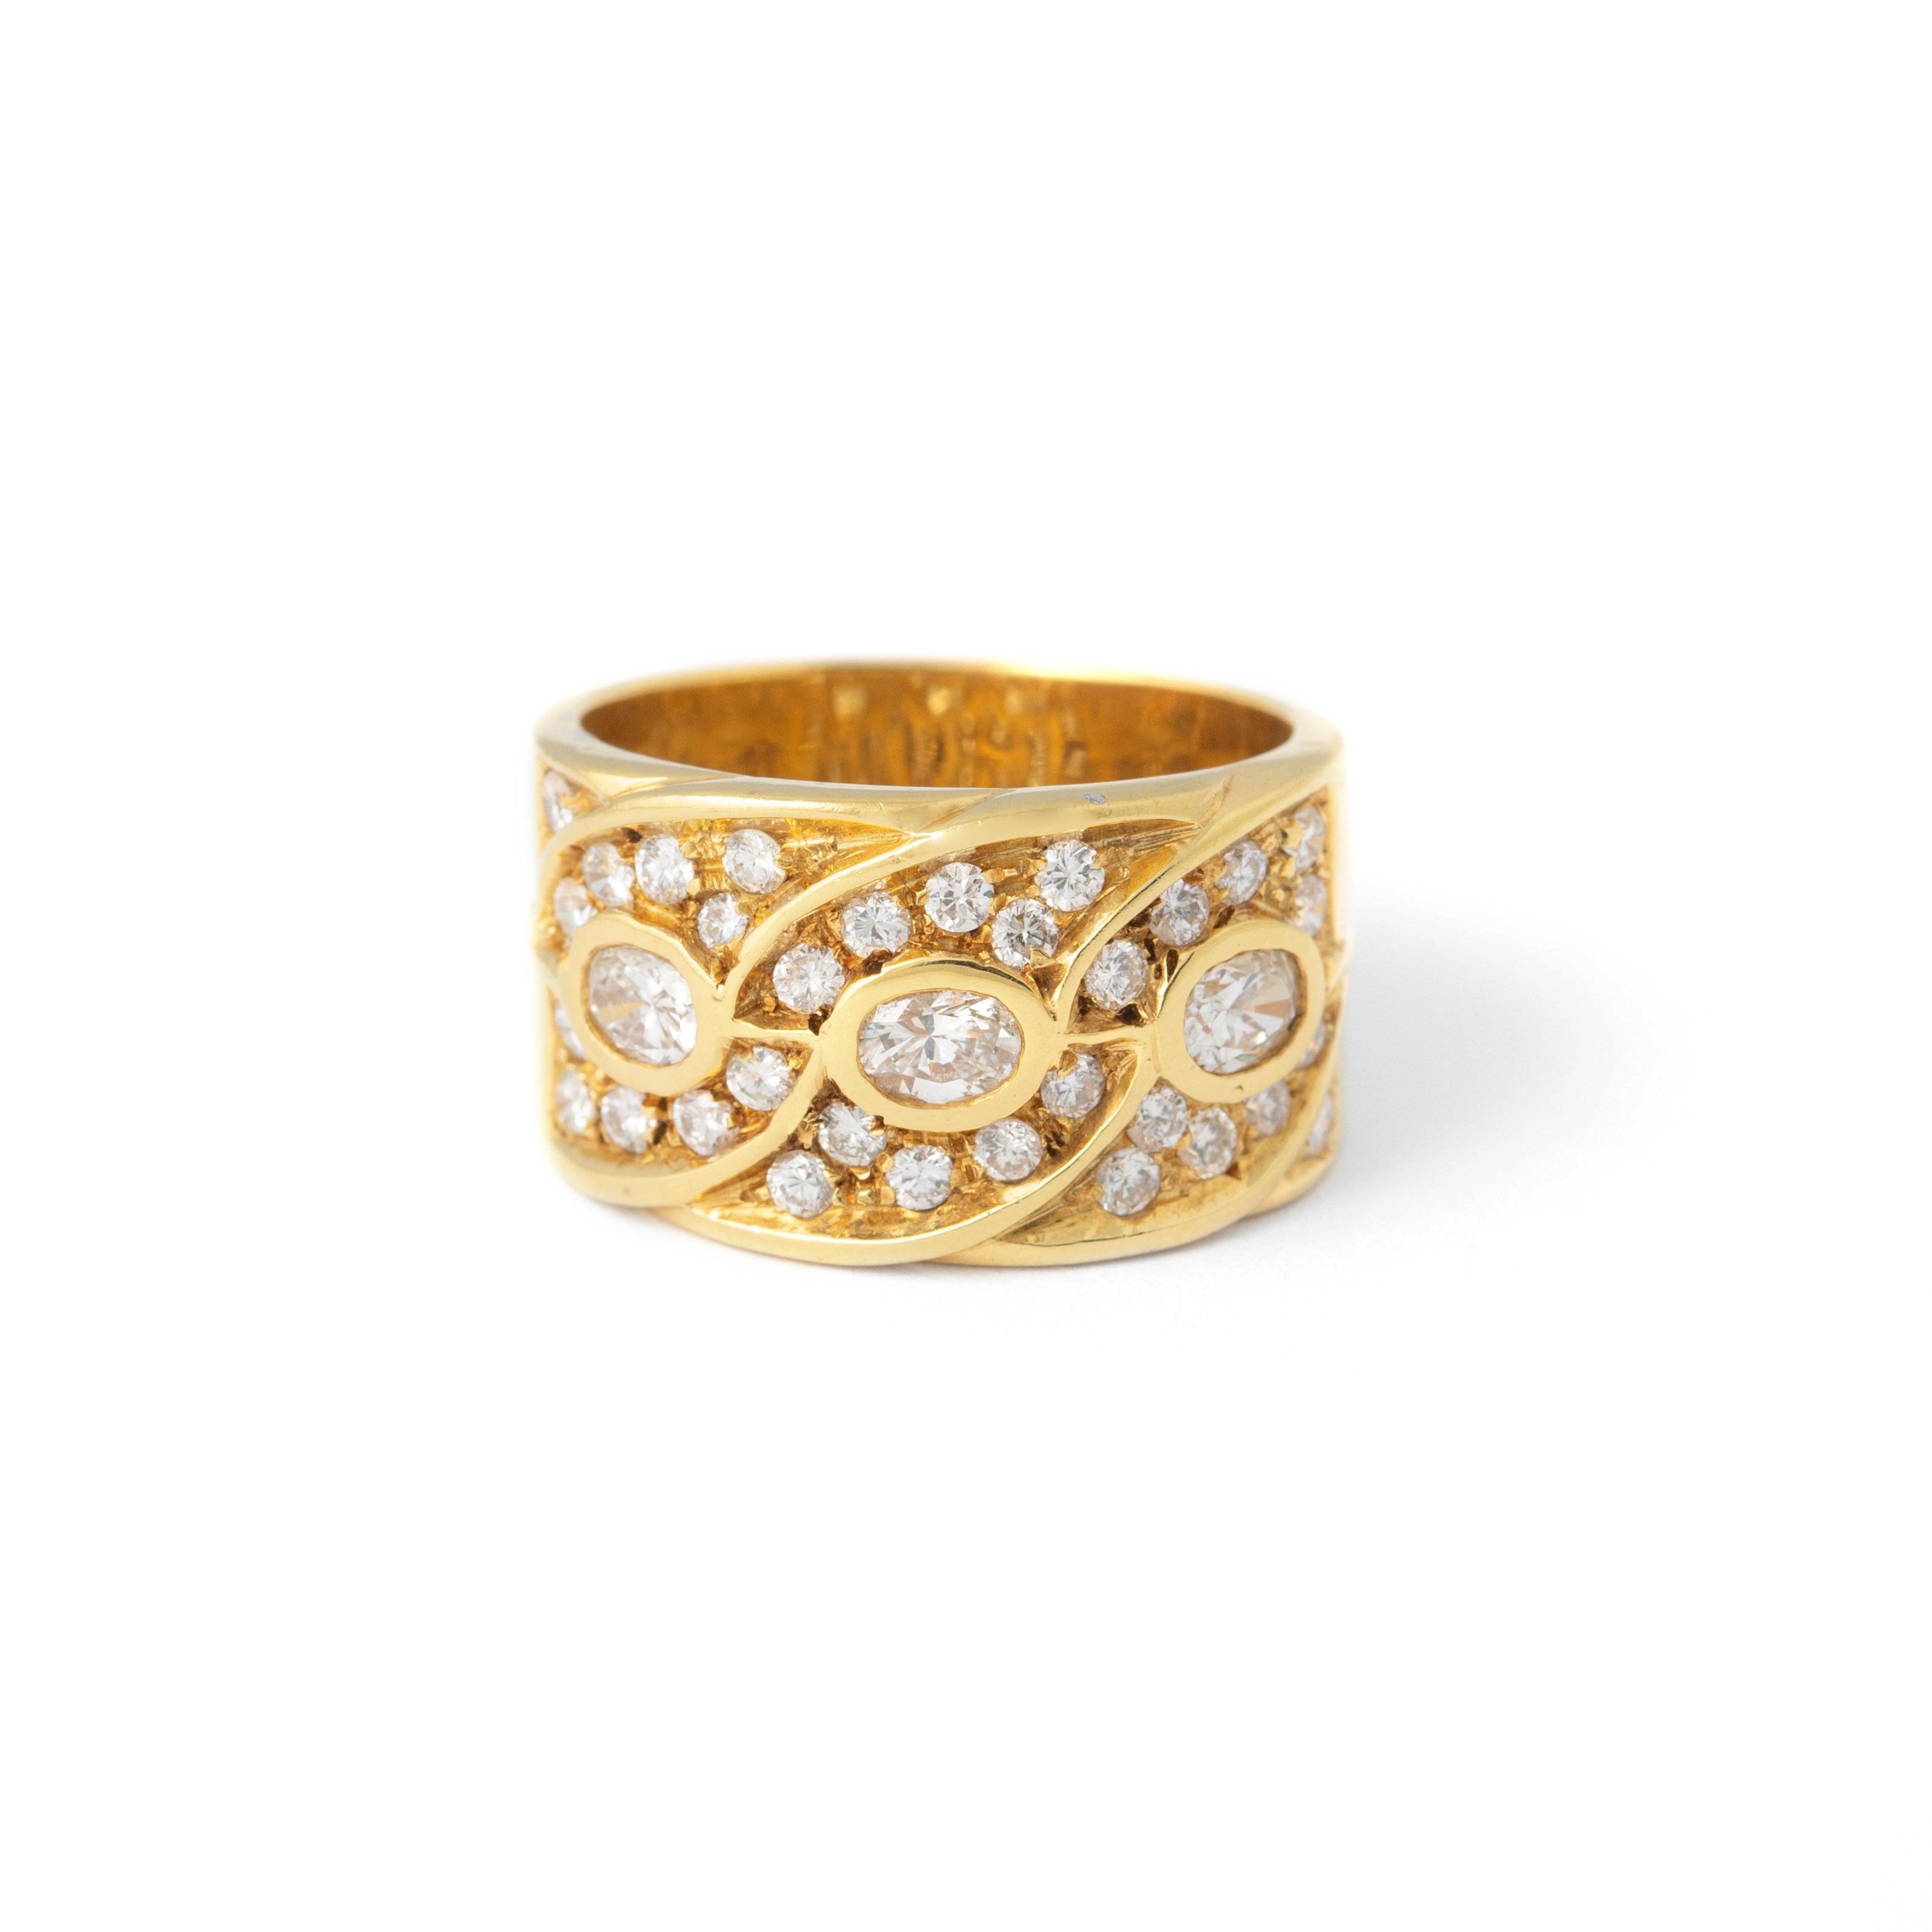 The Diamond Yellow Gold 18K Ring is an exquisite piece of jewelry set with a total of 1.05 carats of dazzling diamonds.

The 18-karat yellow gold band enhances the elegance of the ring, creating a luxurious and timeless accessory that effortlessly